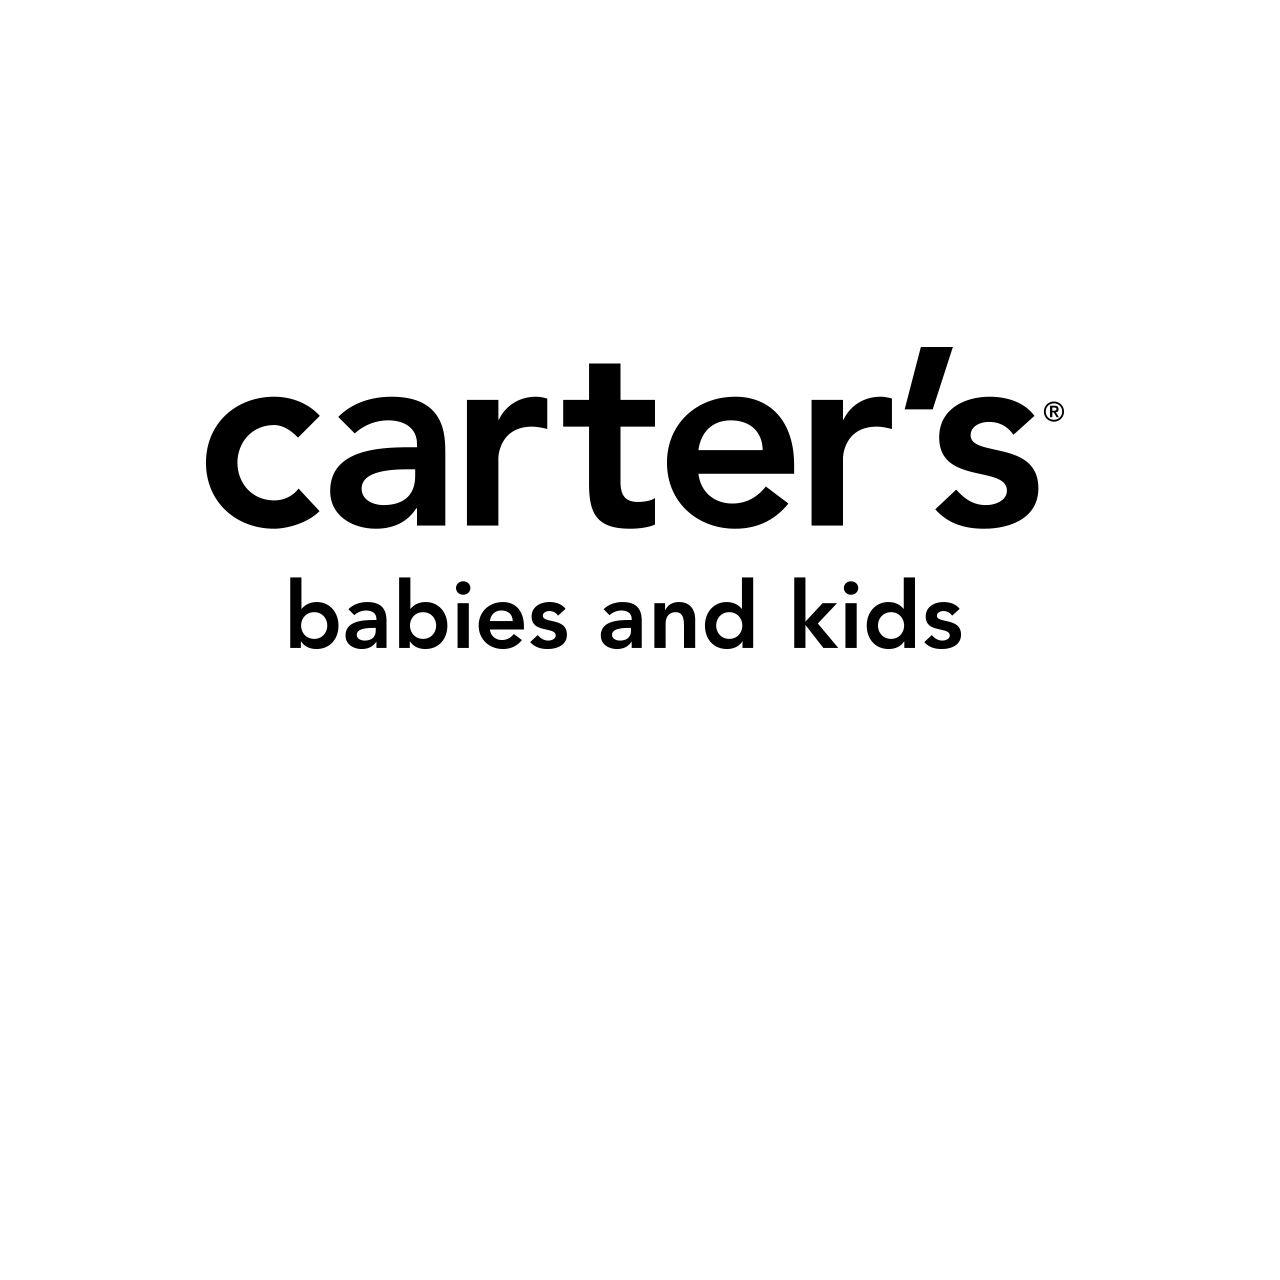 Carter's Logo - Carter's® babies and kids. The Outlet Collection